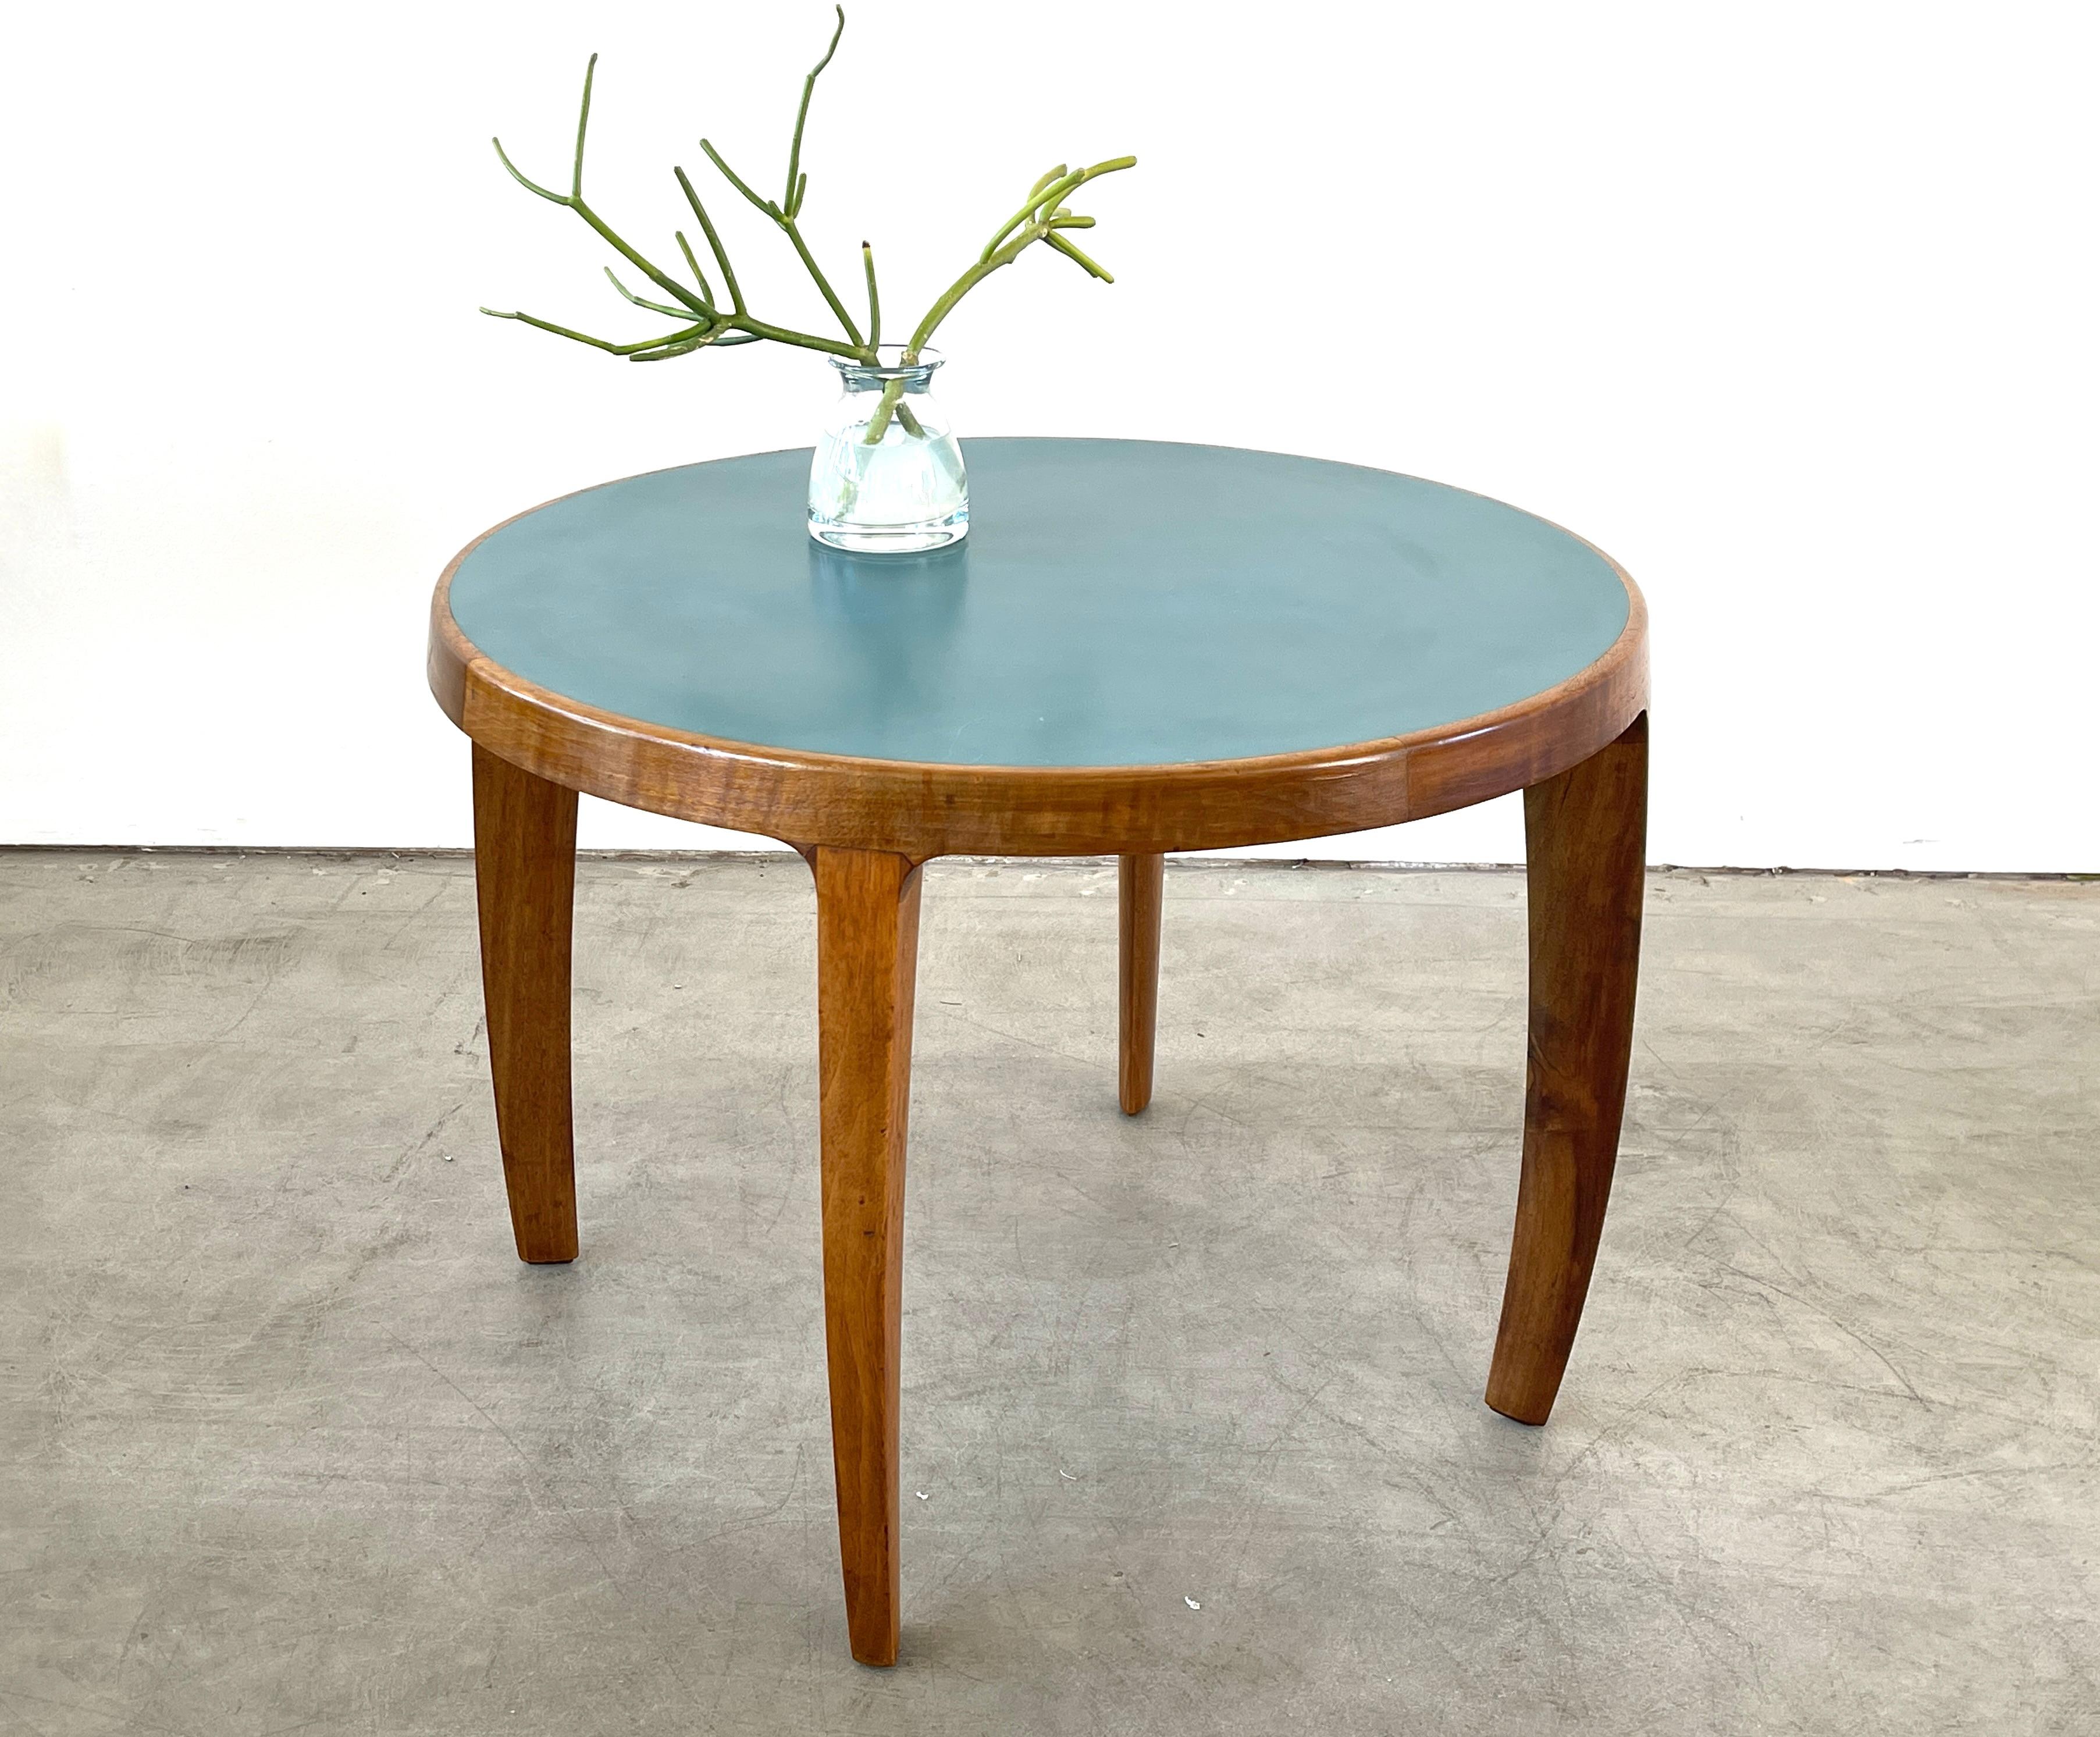 Beautiful round side table with lines inspired by Gio Point
Graceful tapered legs with original turquoise blue laminate top.